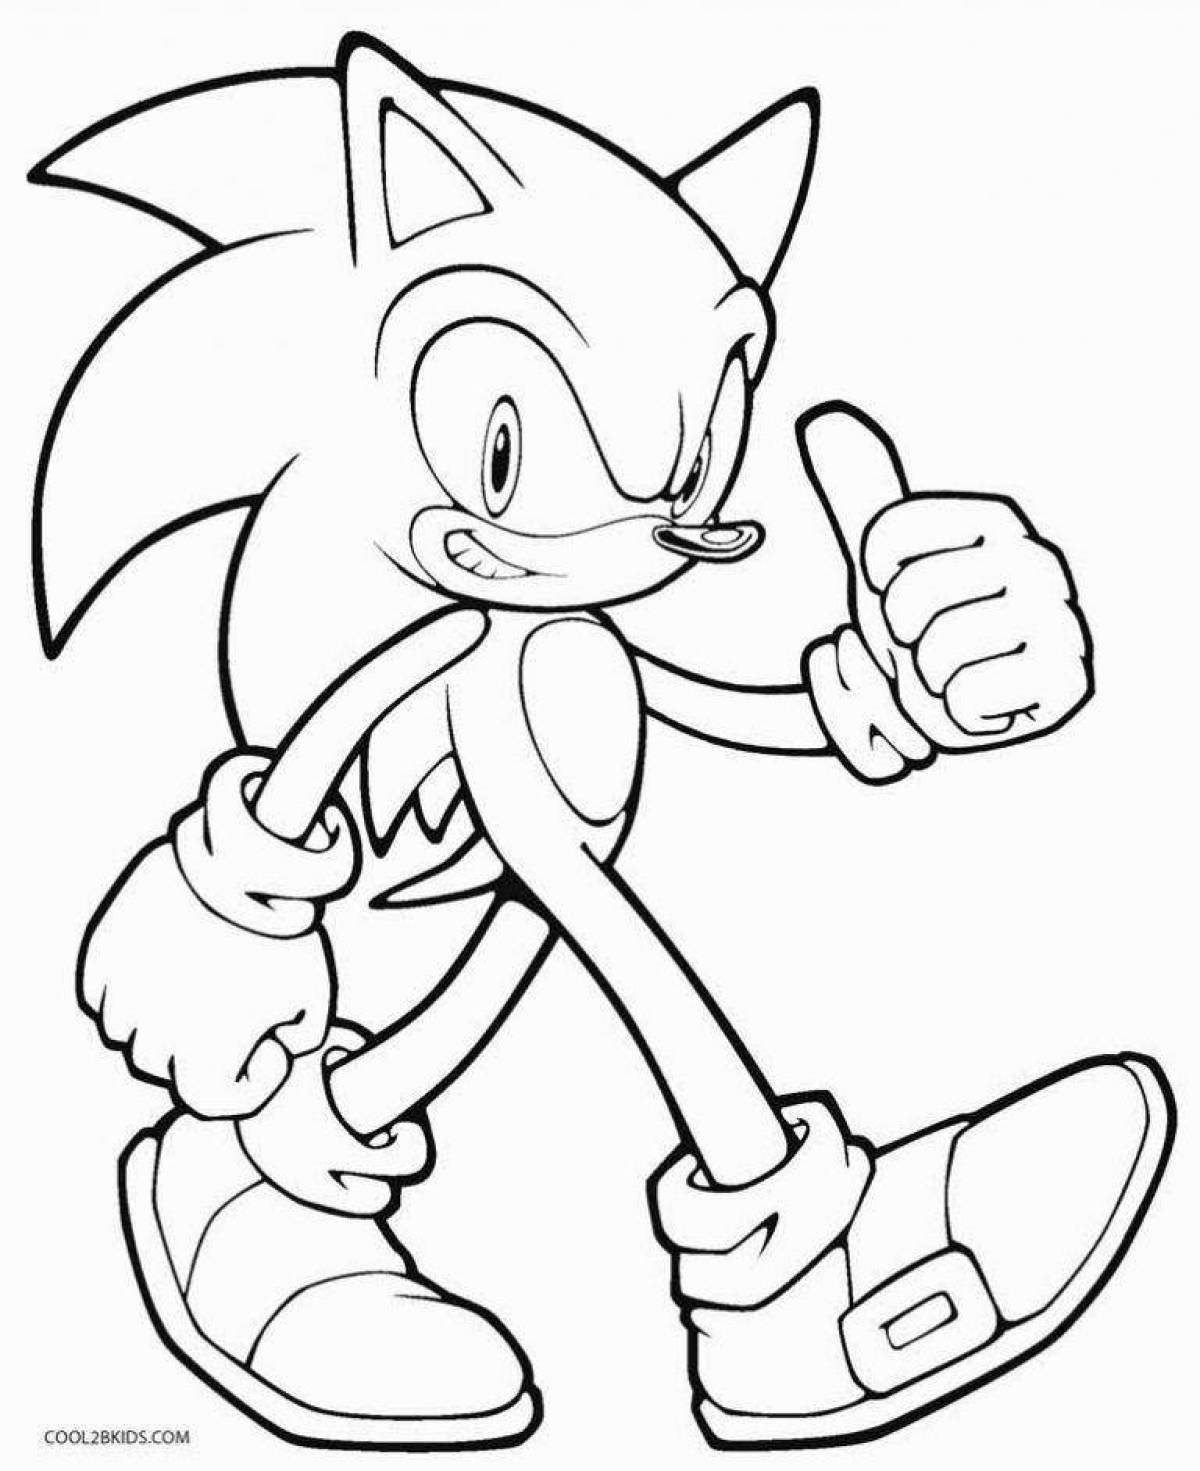 Silly sonic 2 coloring book